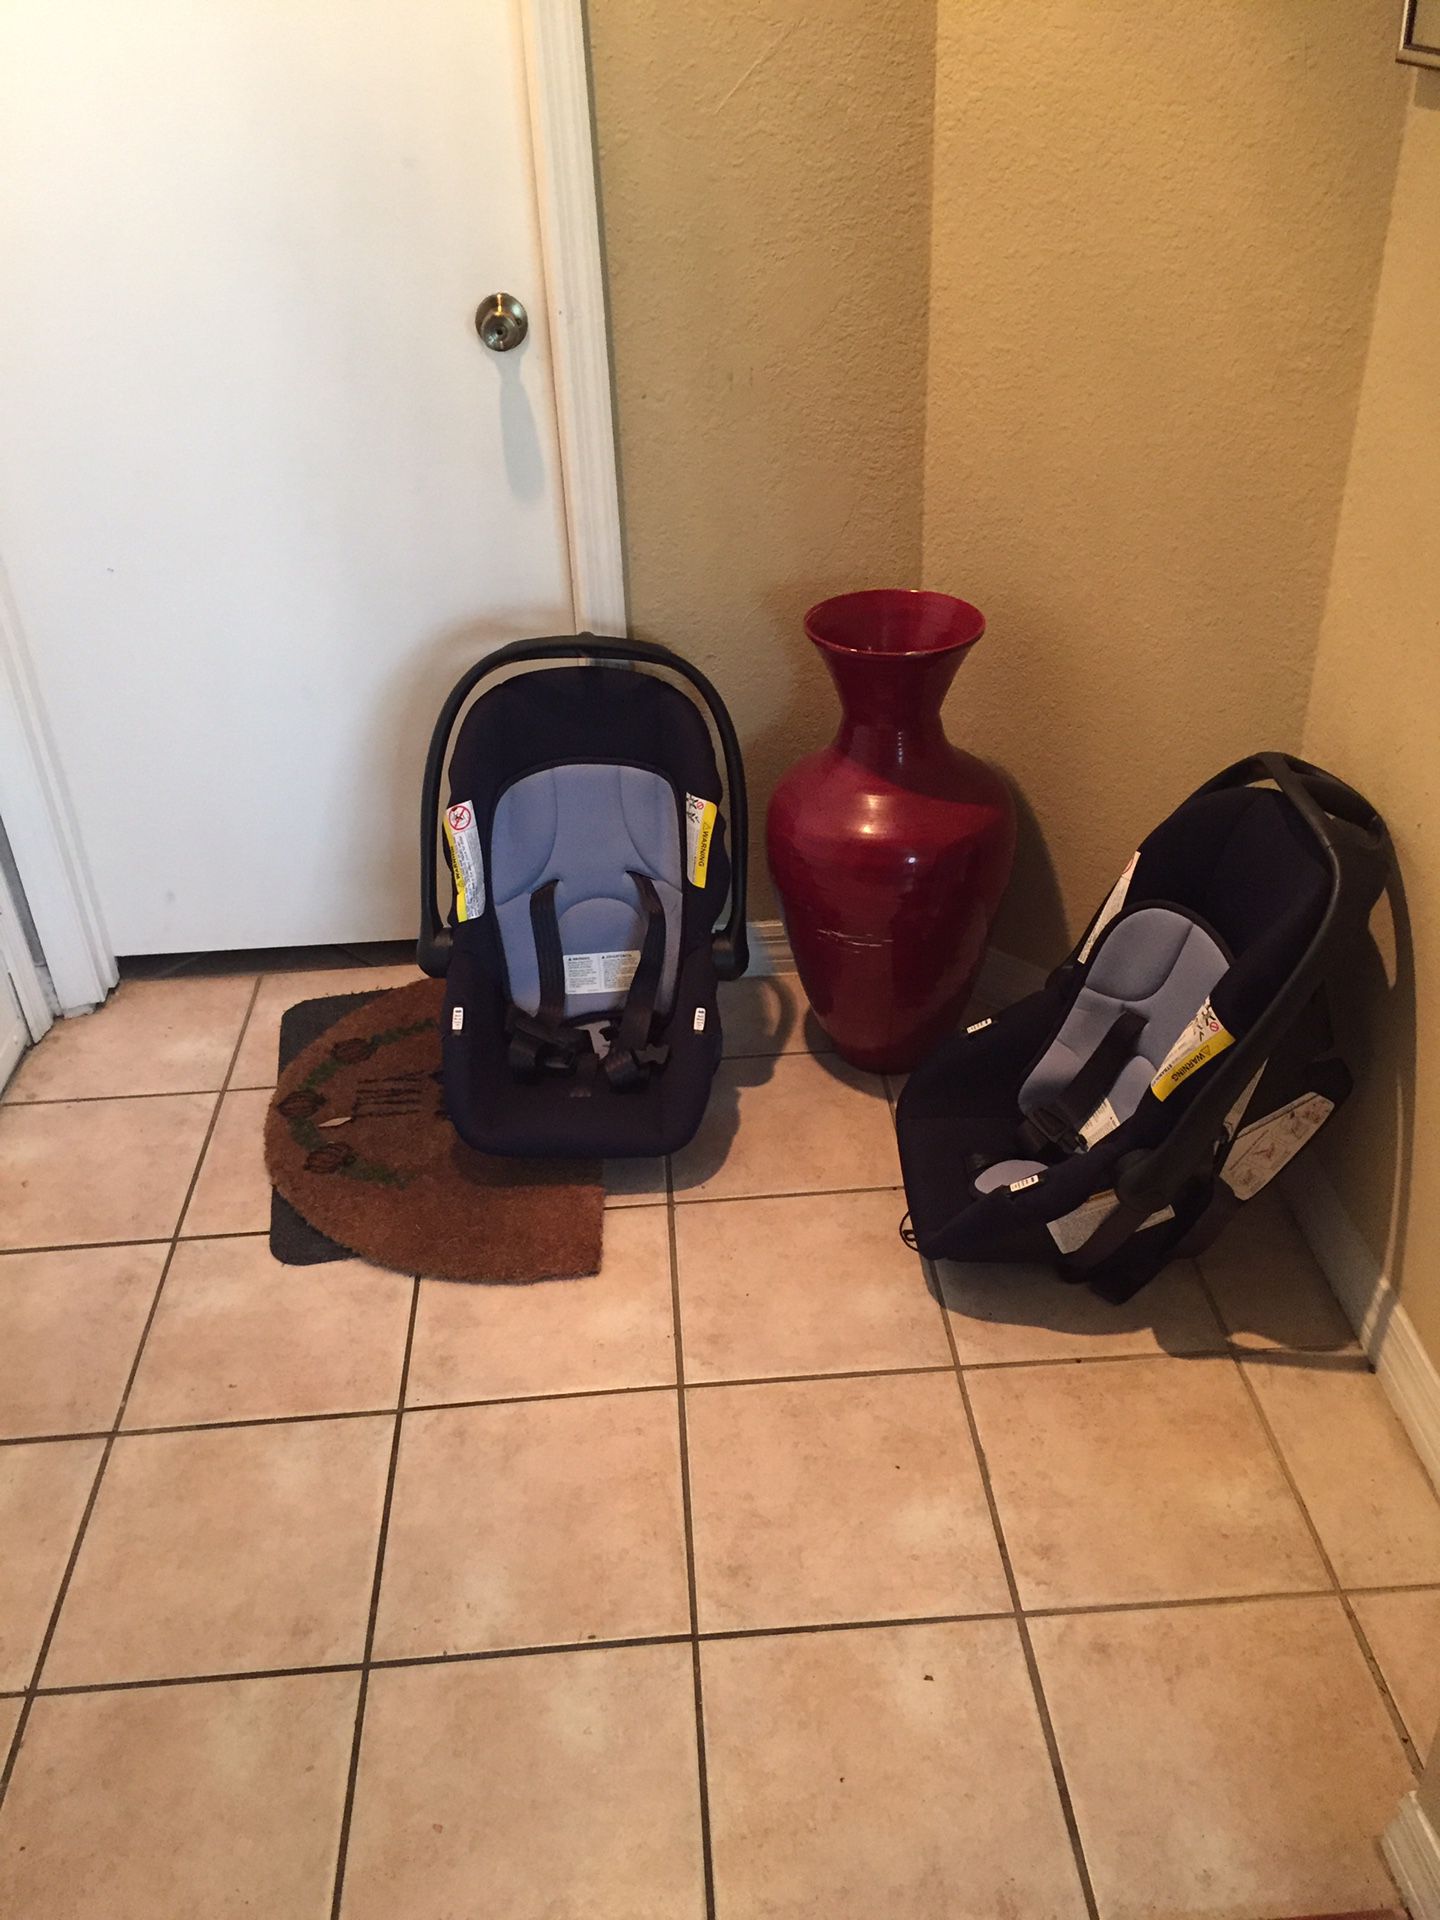 Baby ride car seats $75 for both or $40 for each